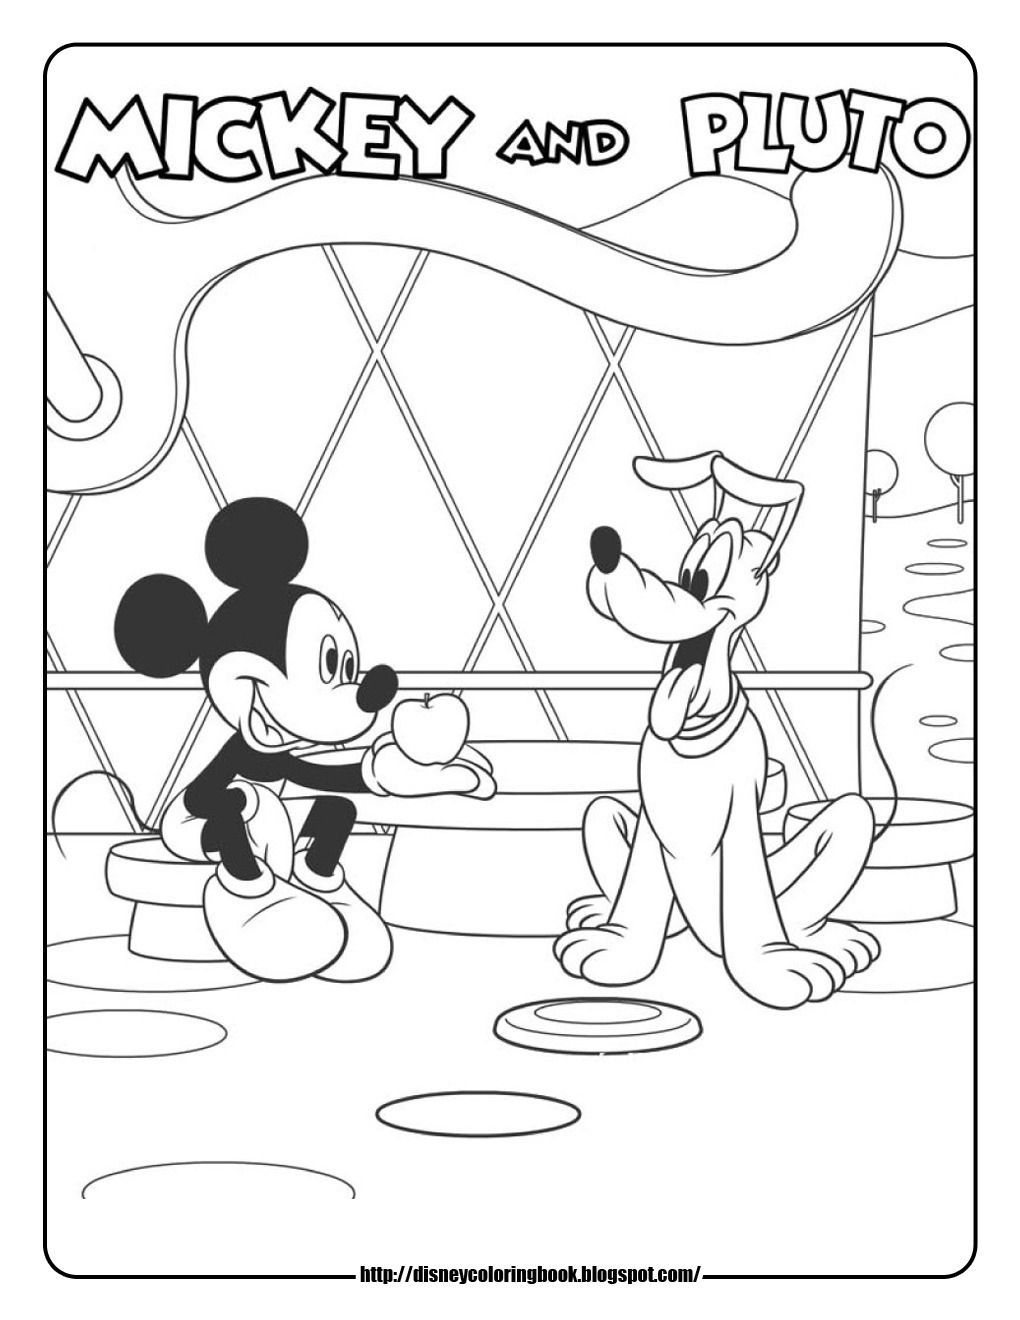 Mickey and Pluto Coloring Pages (Page 1) - Line.17QQ.com